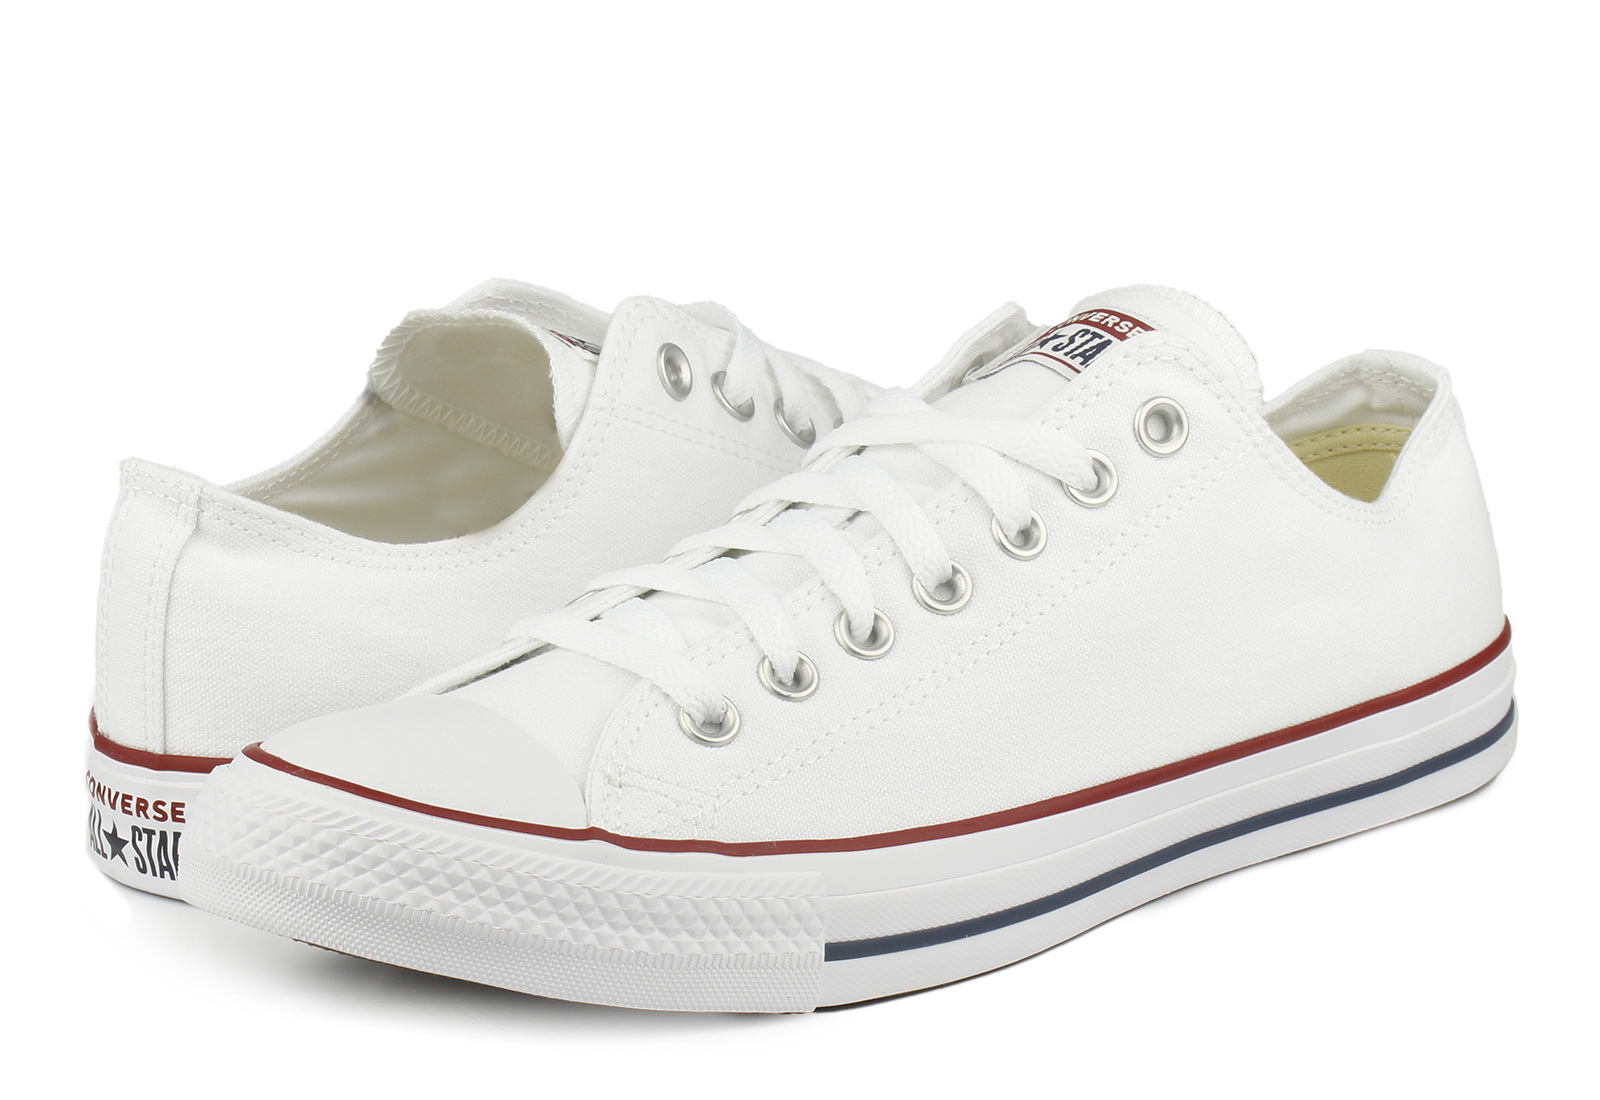 Converse Sneakers - Chuck Taylor - M7652C Shoes Romania